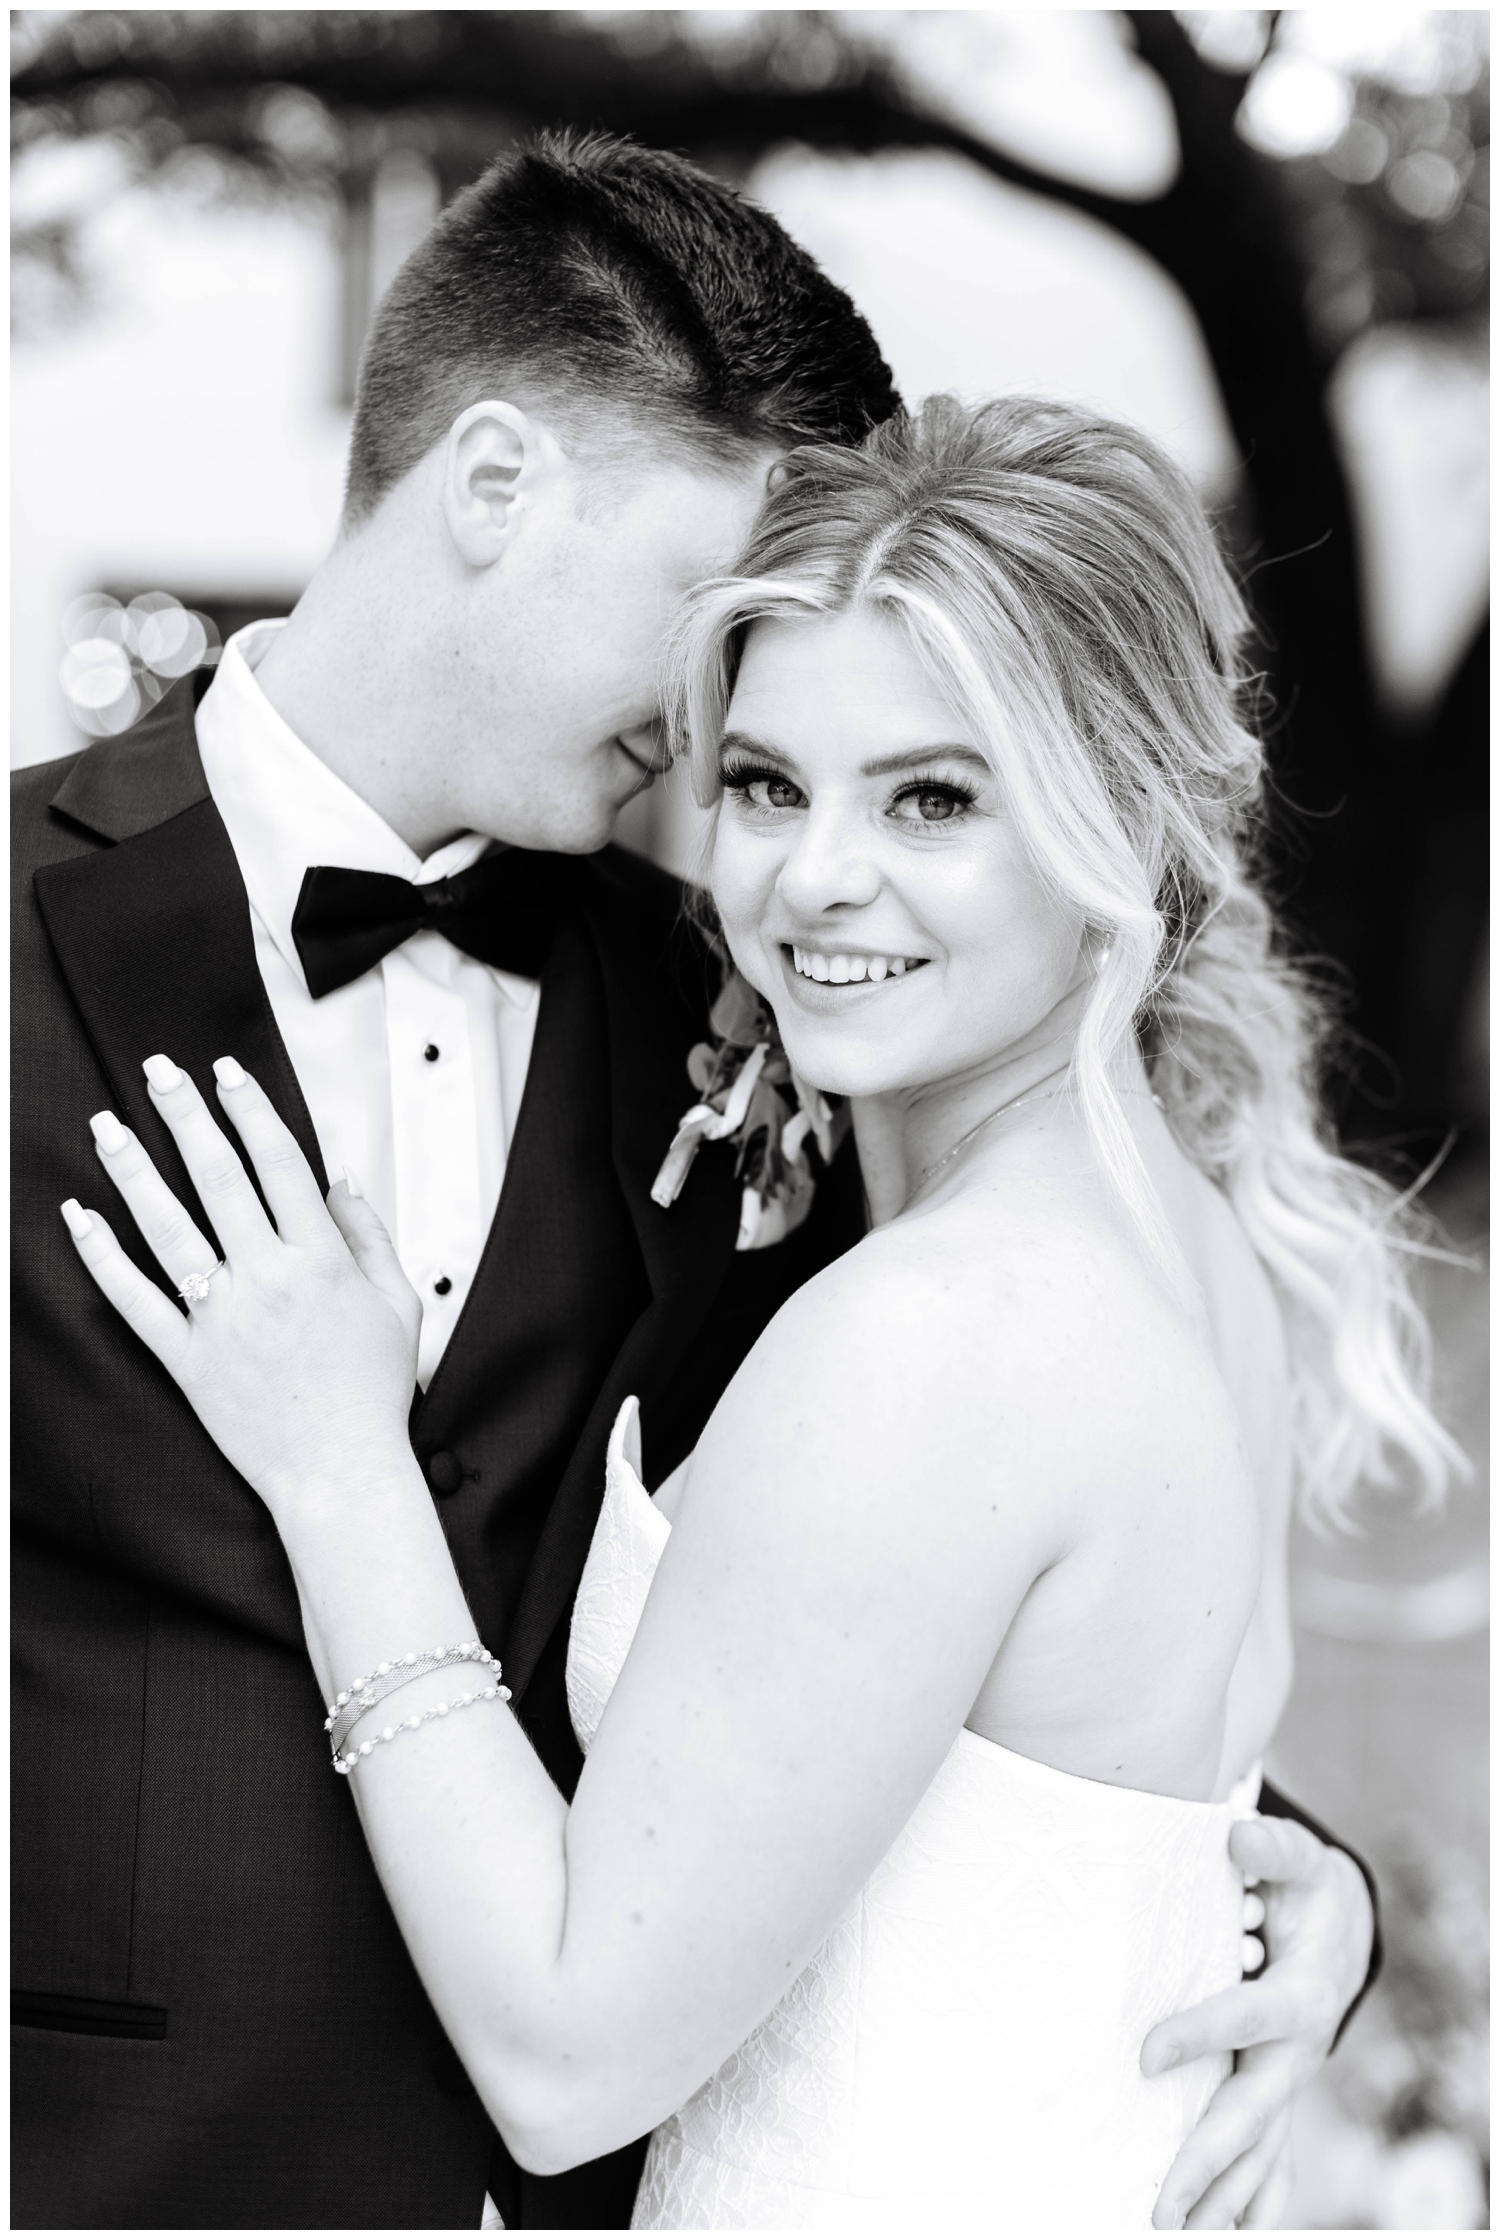 black and white image of bride smiling at camera a groom whispering in her ear